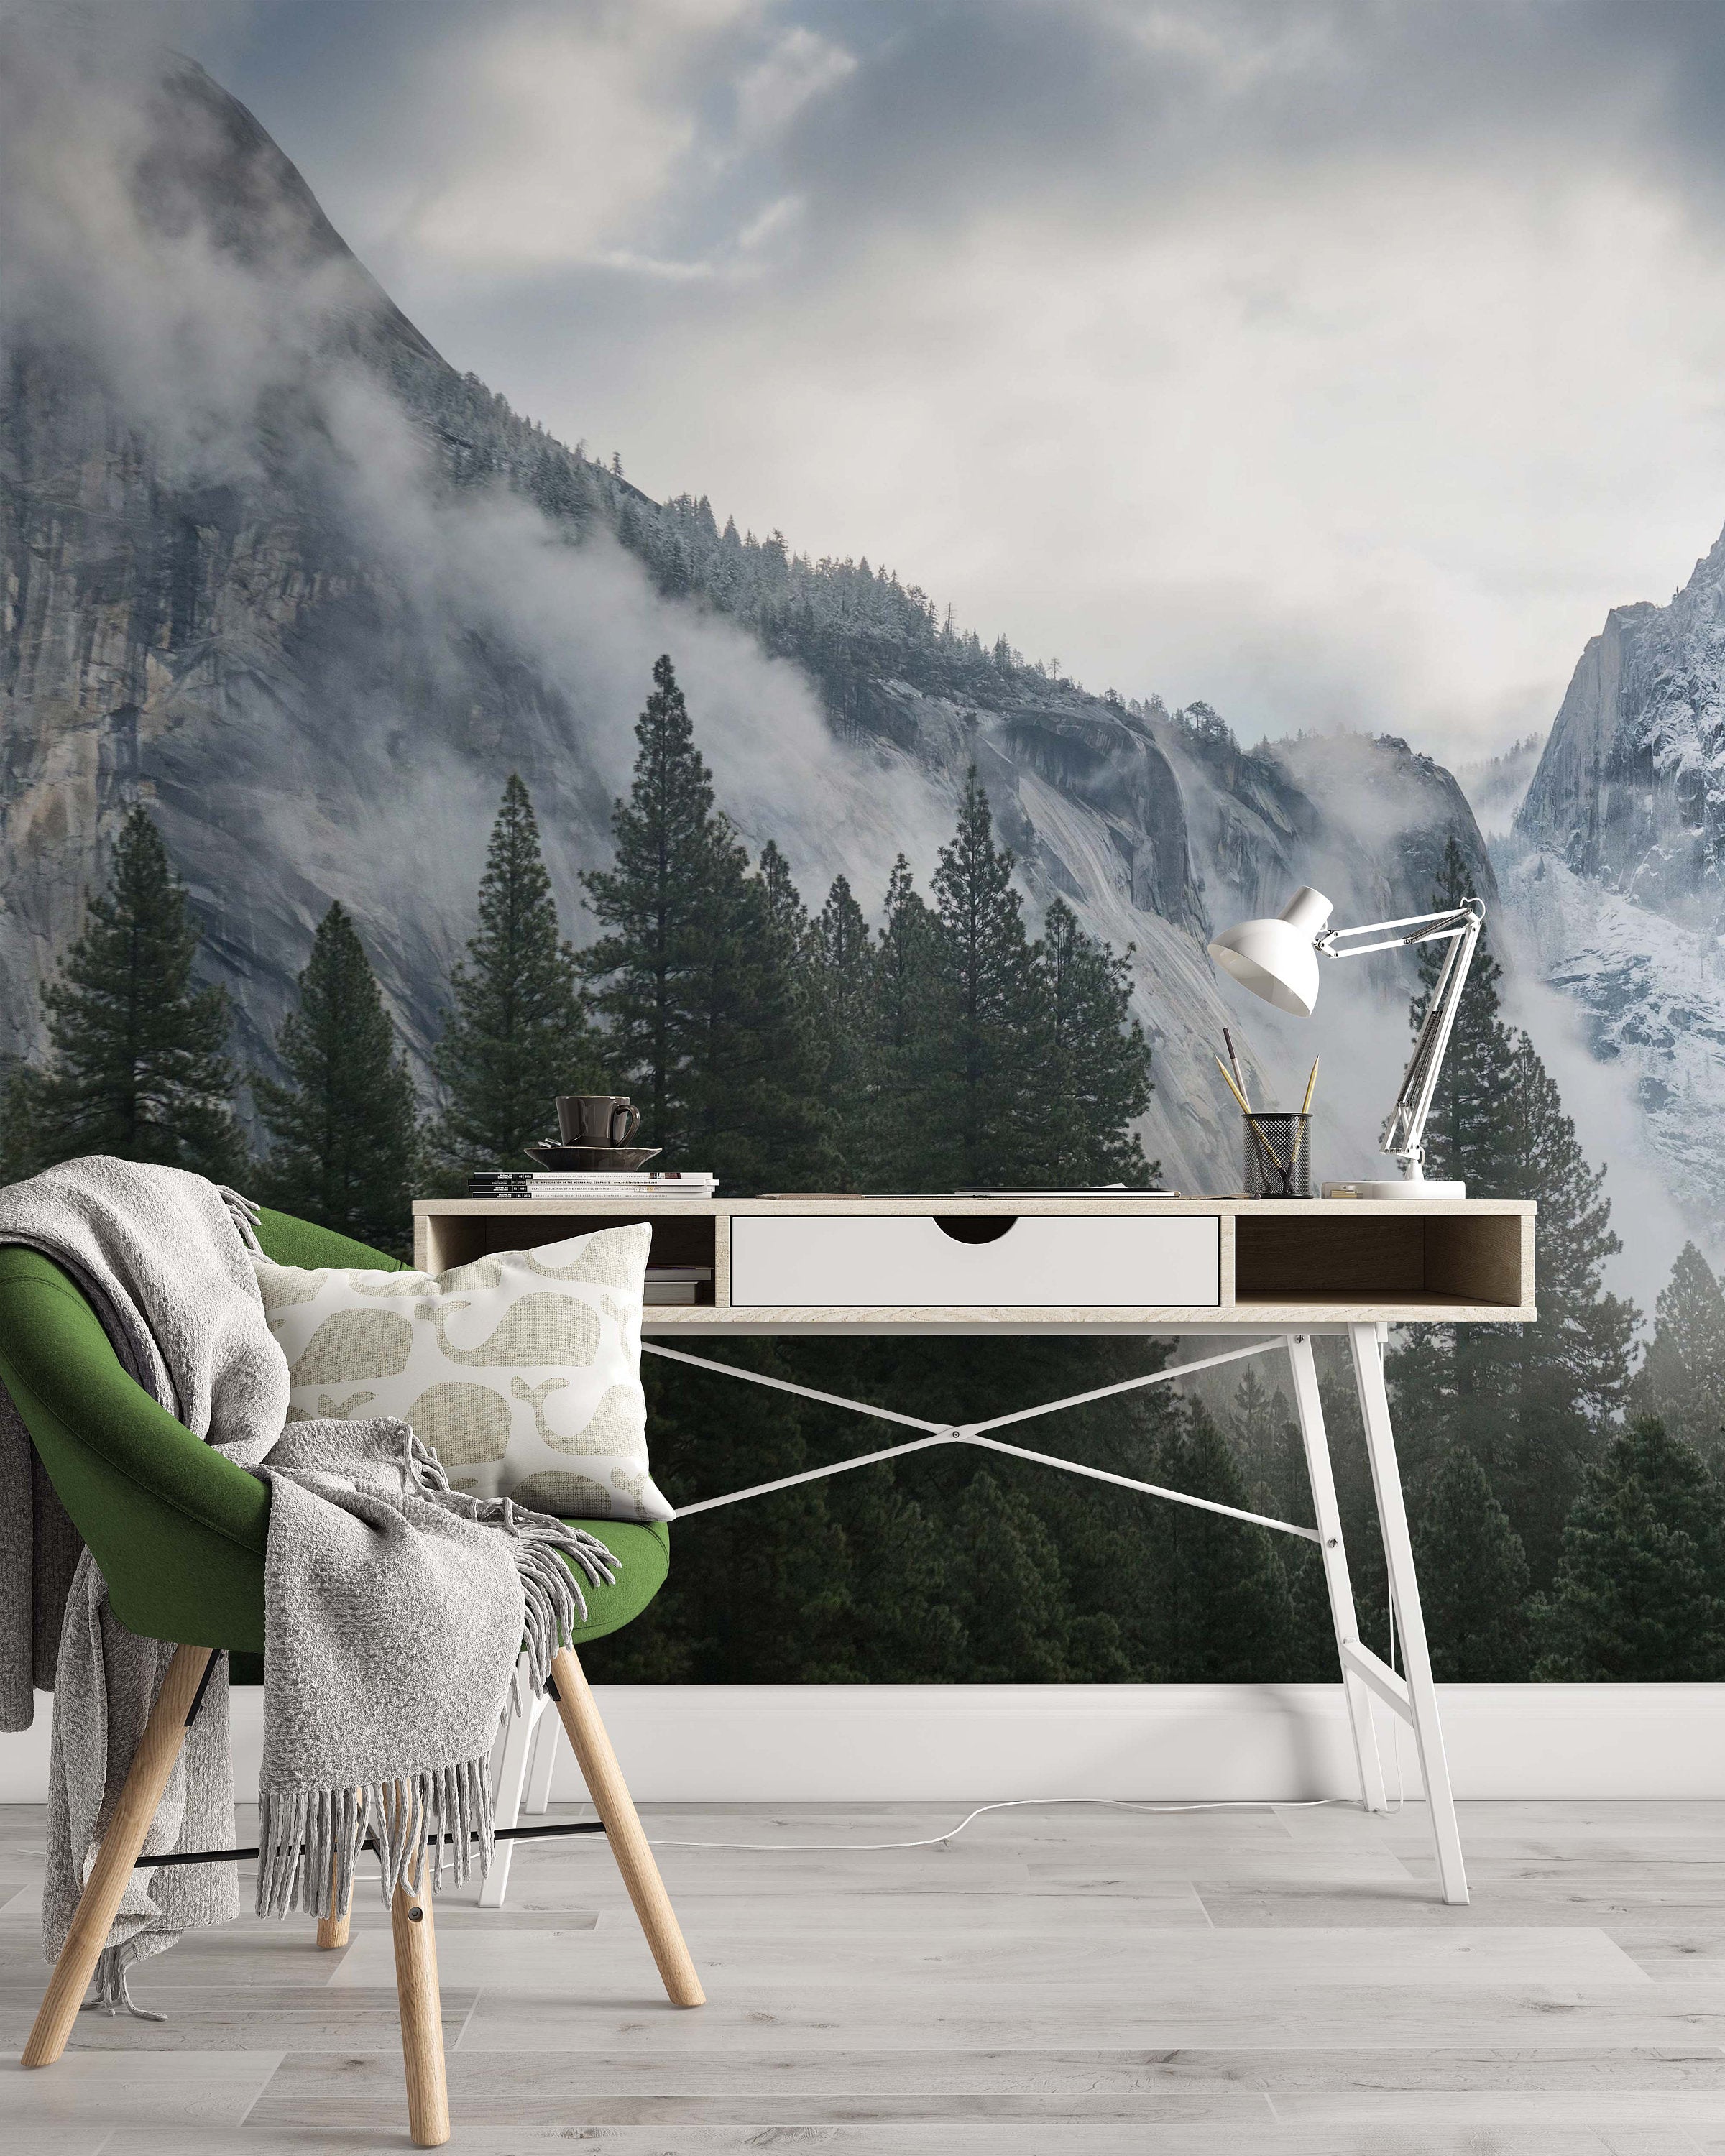 Misty Snowy Mountain Forest Landscape Nature Wallpaper Cafe Restaurant Decoration Living Room Bedroom Wall Covering Mural Home Decor Art